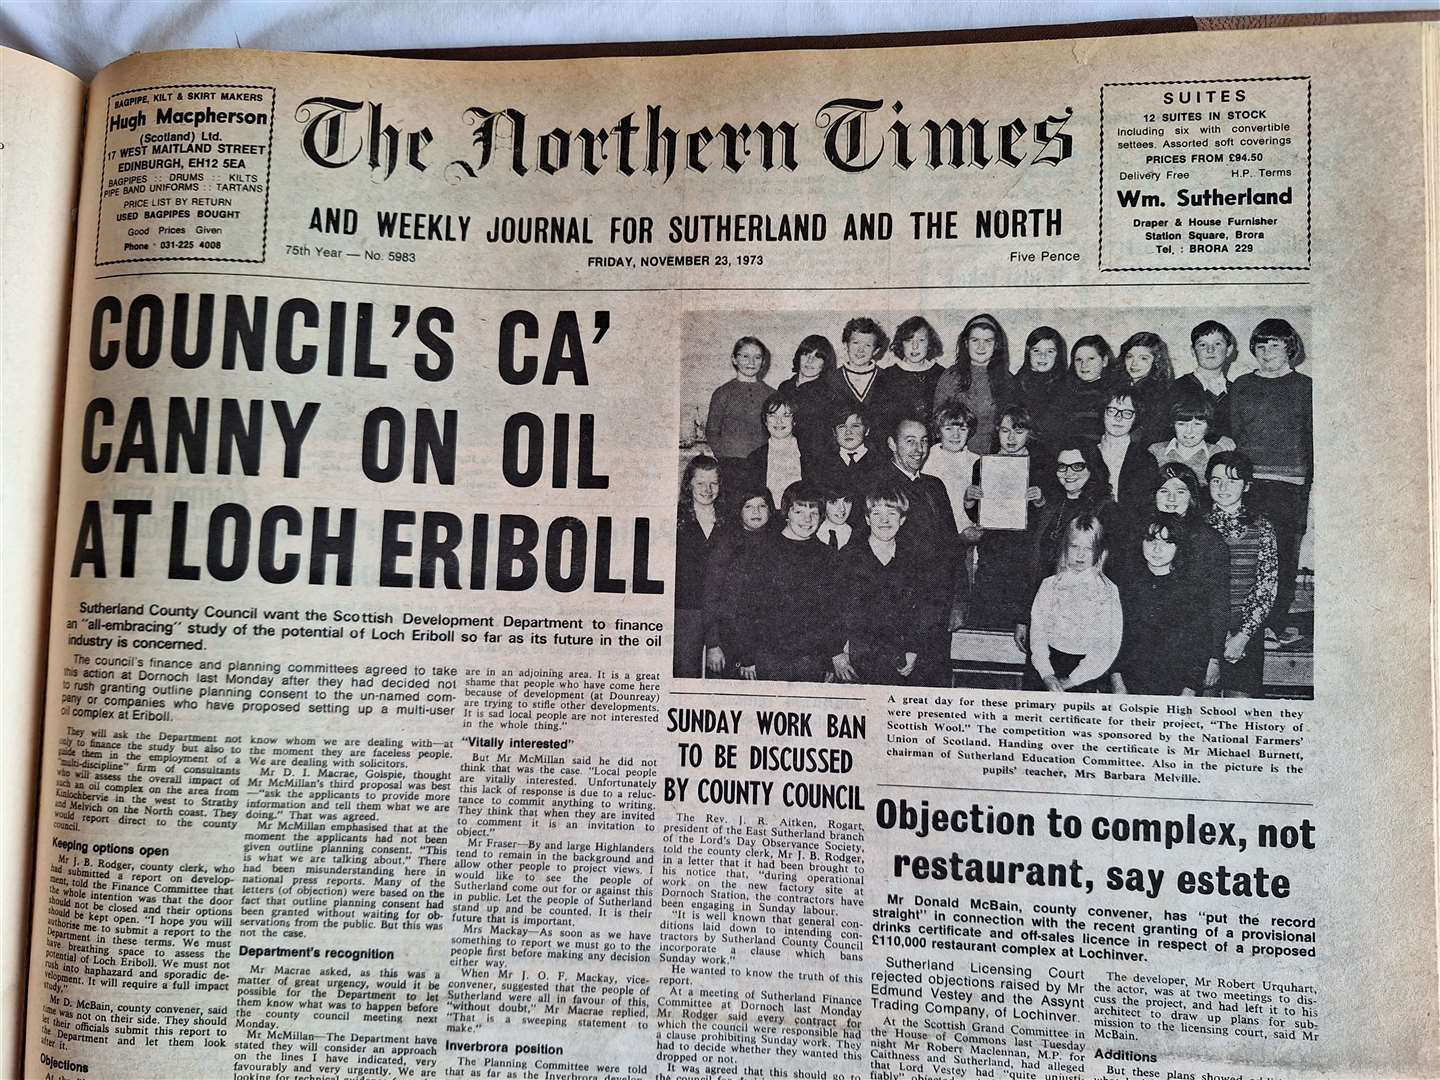 The edition of November 23, 1973.